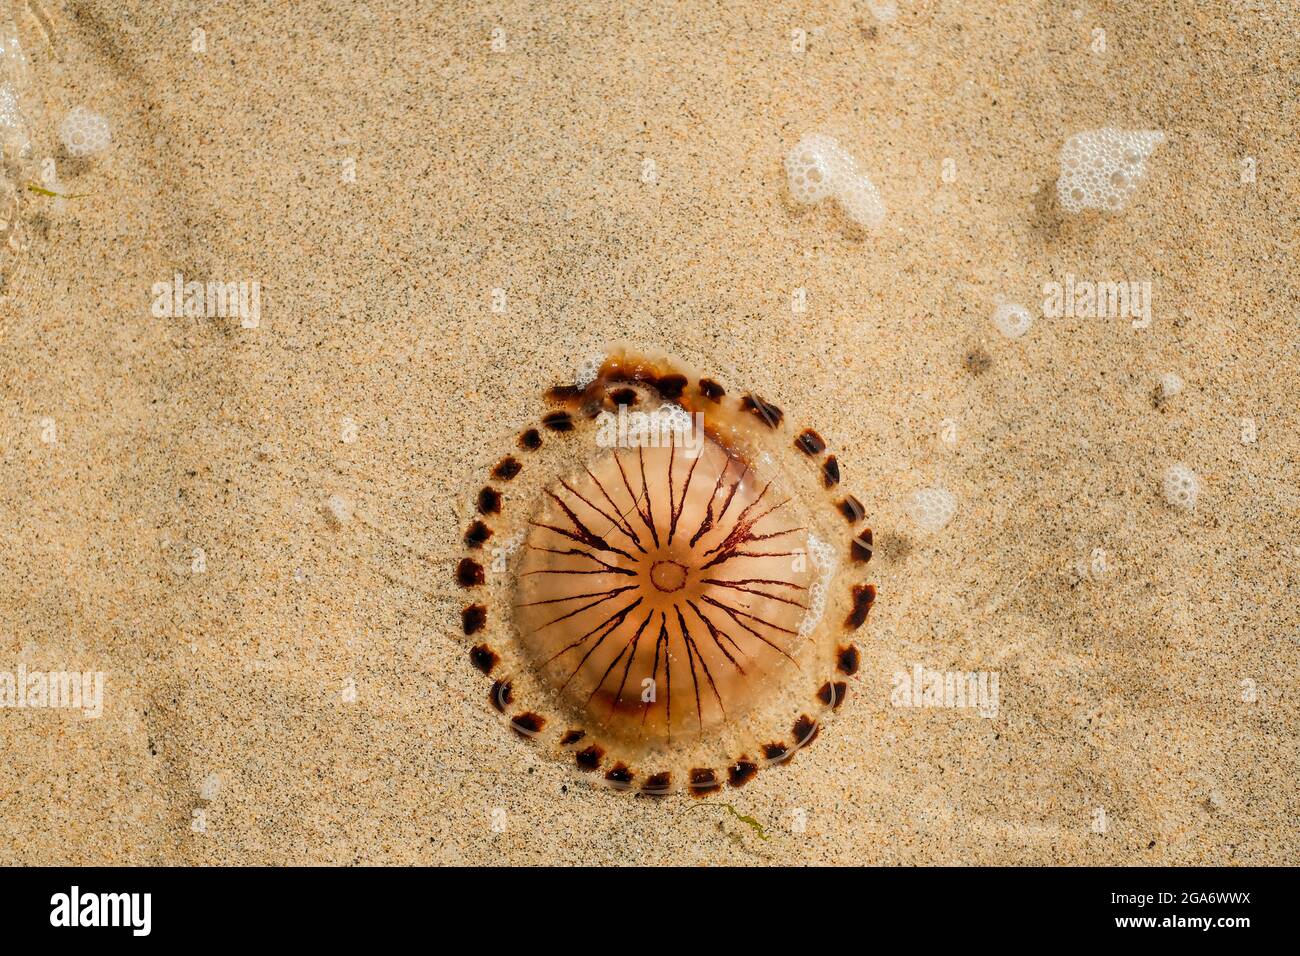 Compass Jellyfish on a UK beach in Summer Stock Photo